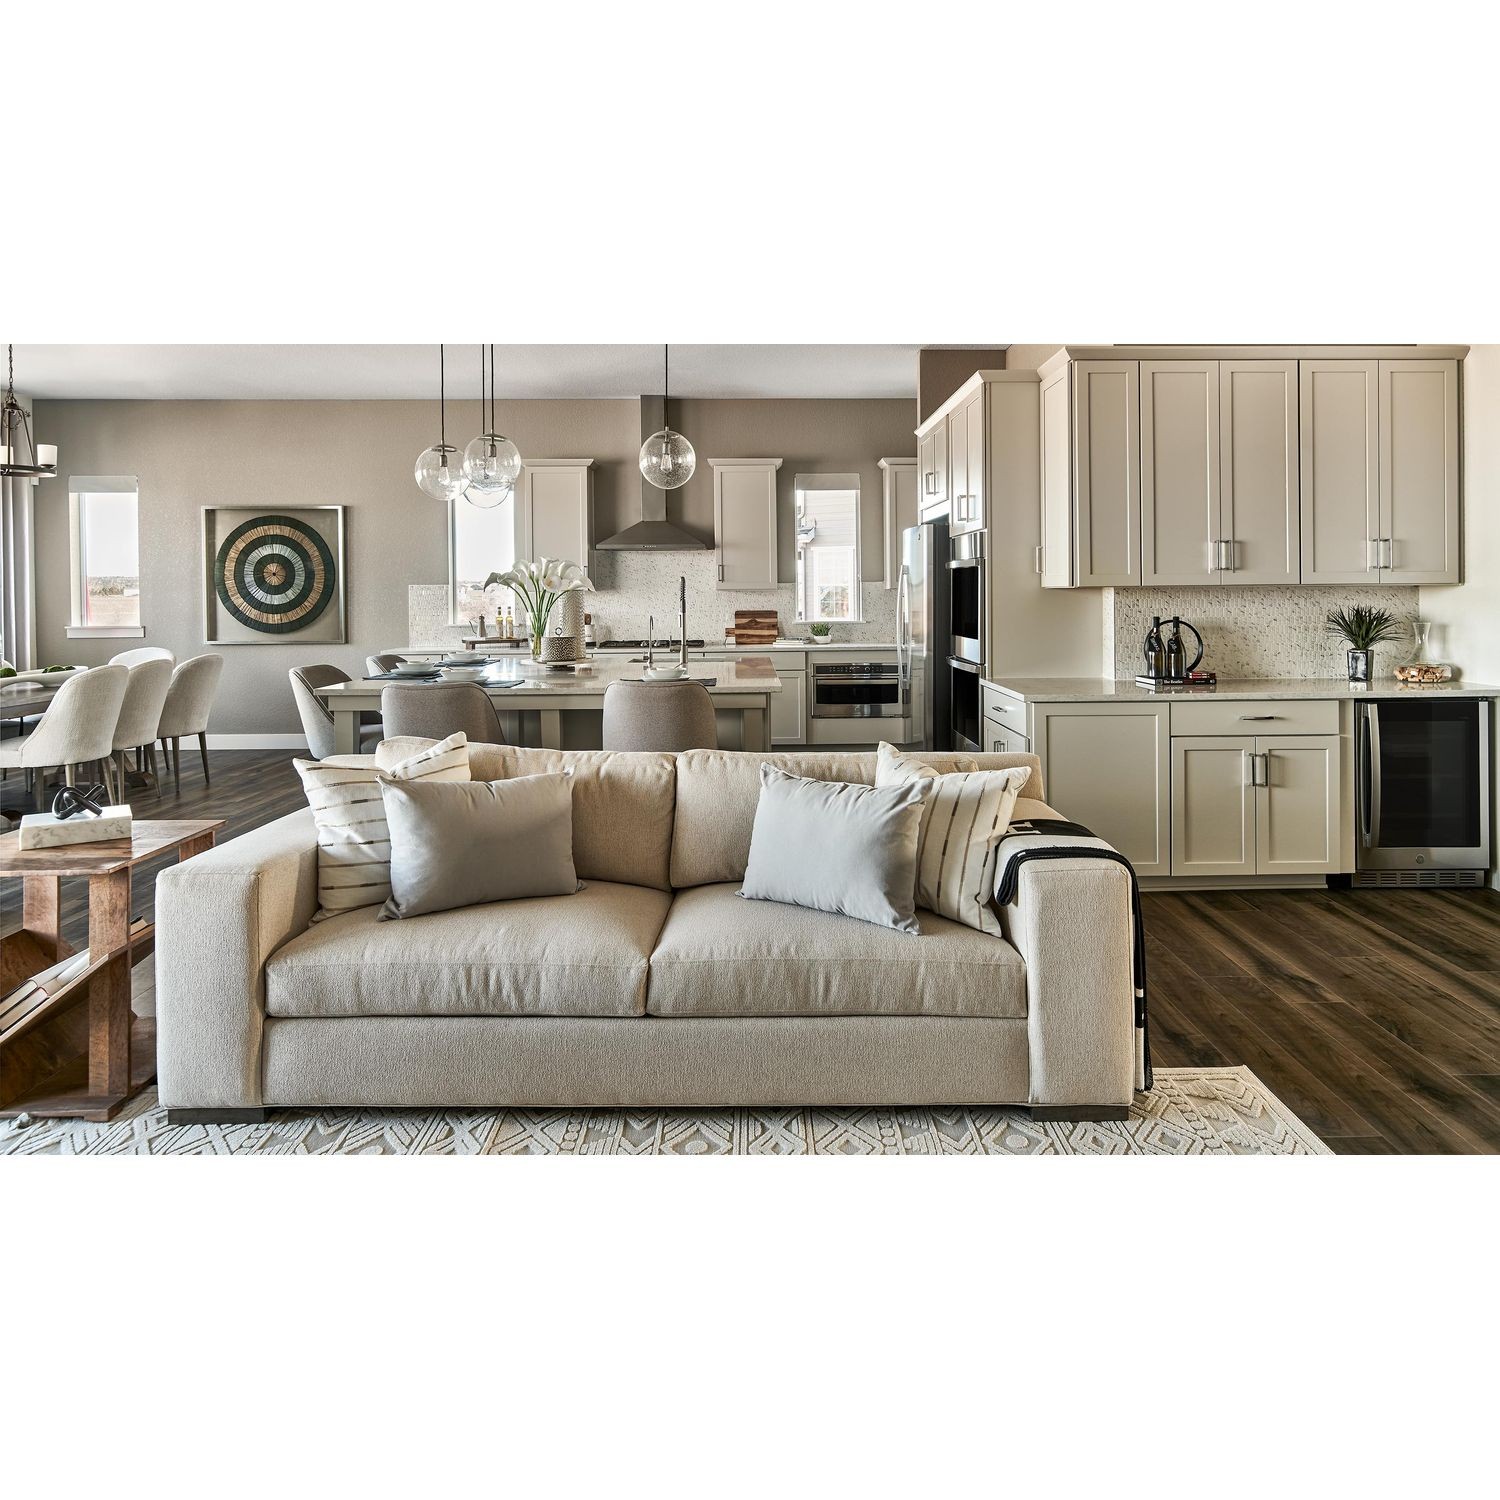 15. Hillside At Crystal Valley Destination Collection